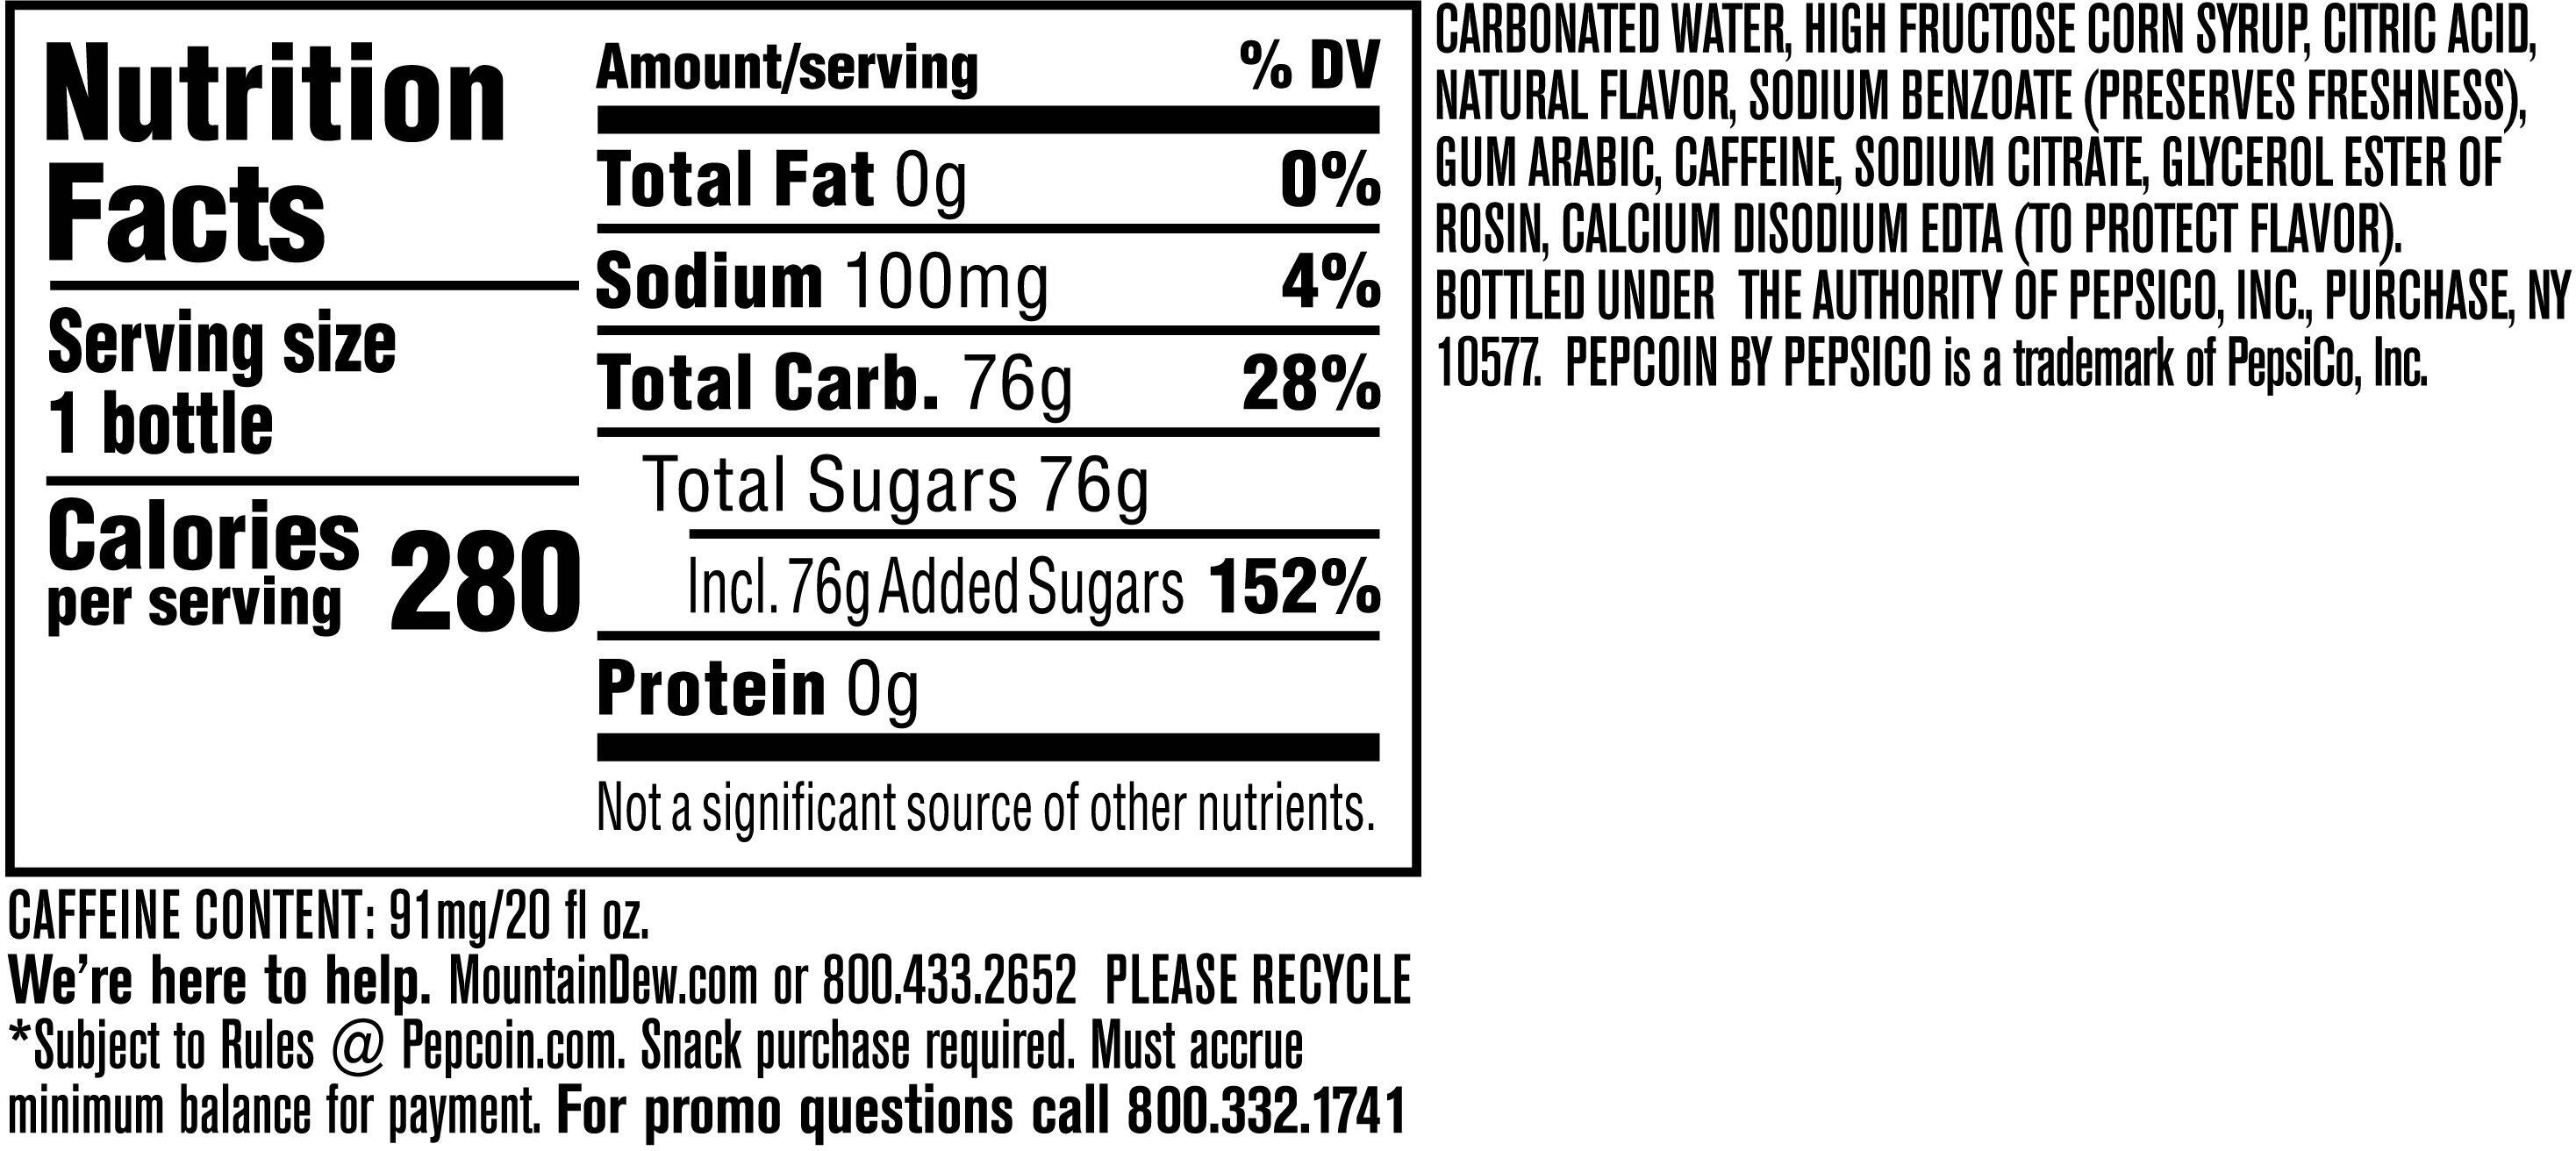 Image describing nutrition information for product Mtn Dew White Out Citrus